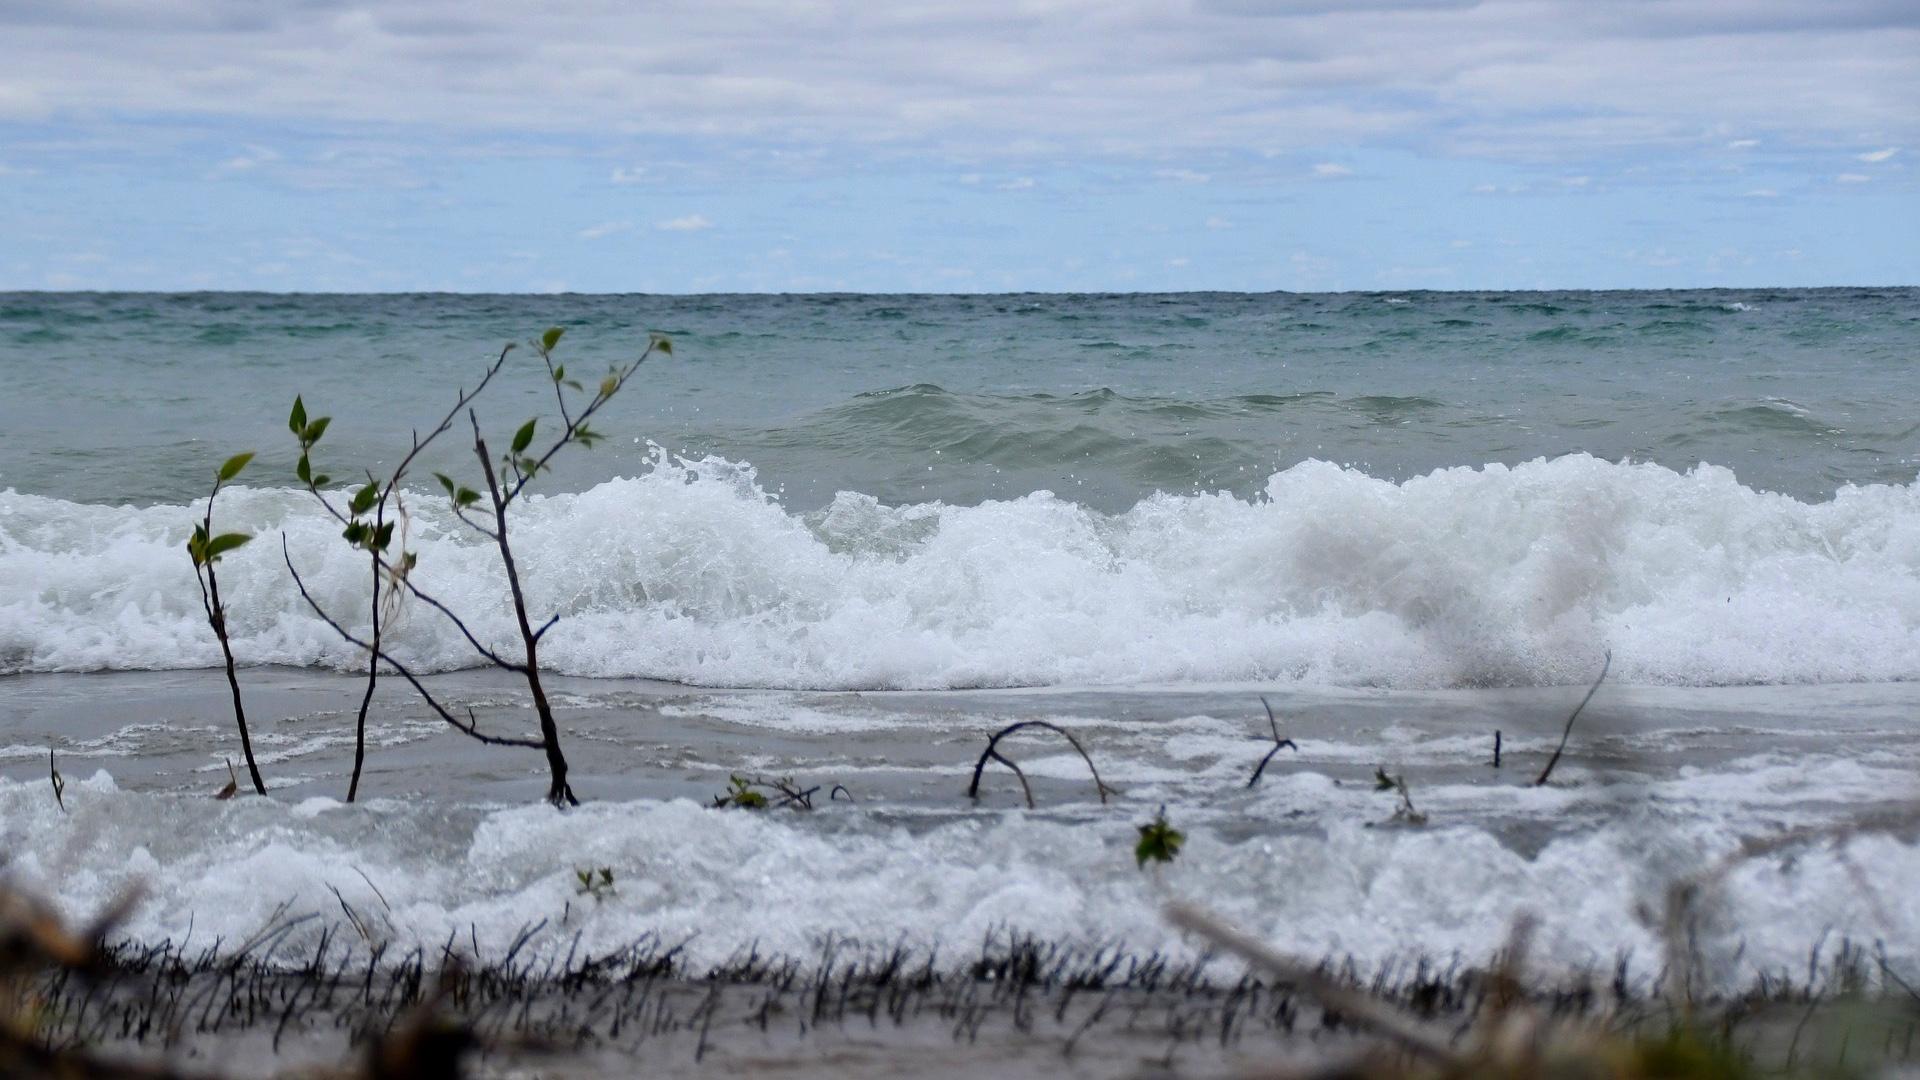 Strong winds are creating high waves along the Lake Michigan shoreline. (Nikkiwjourney / Pixabay)